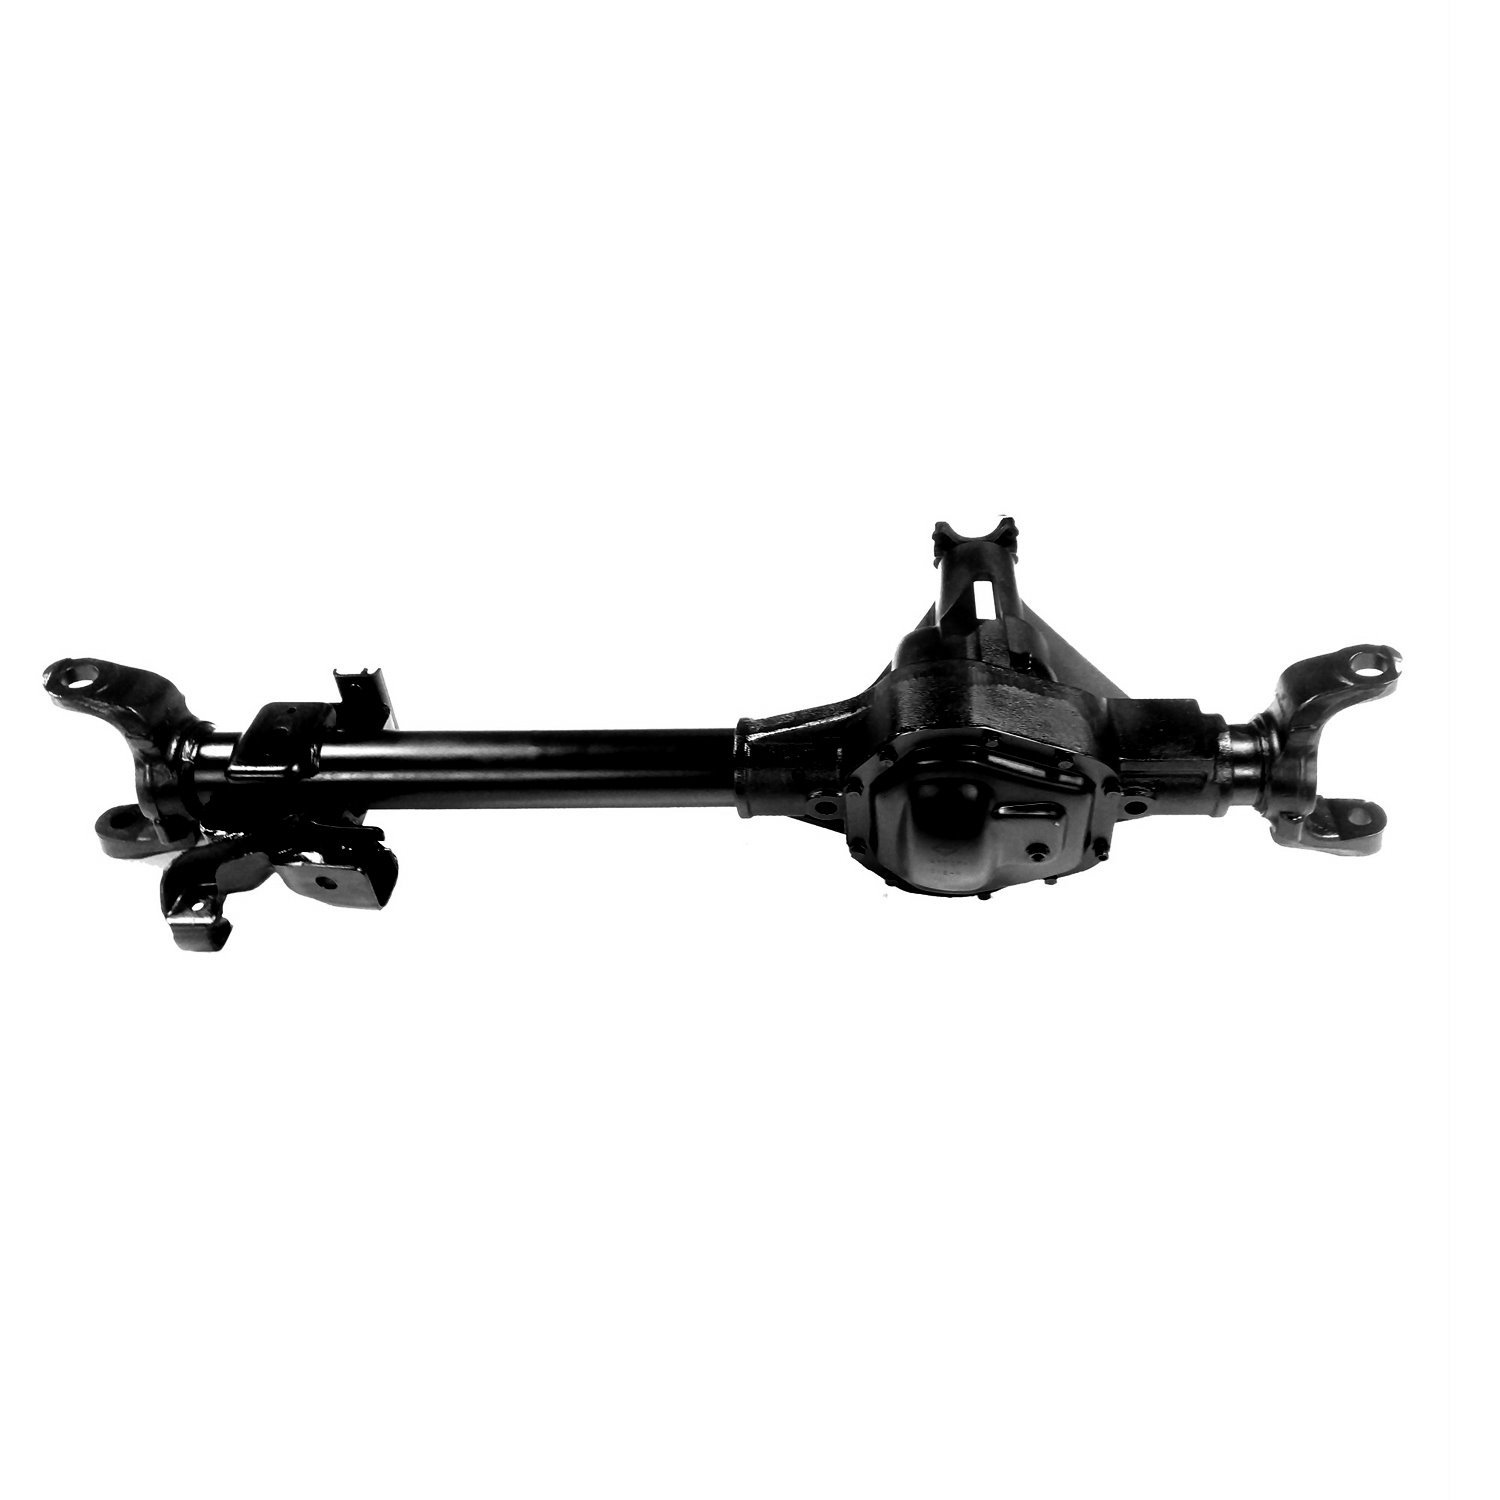 Remanufactured Complete Axle Assembly for Dana 60 1999 Ford F350 3.73 Ratio, DRW